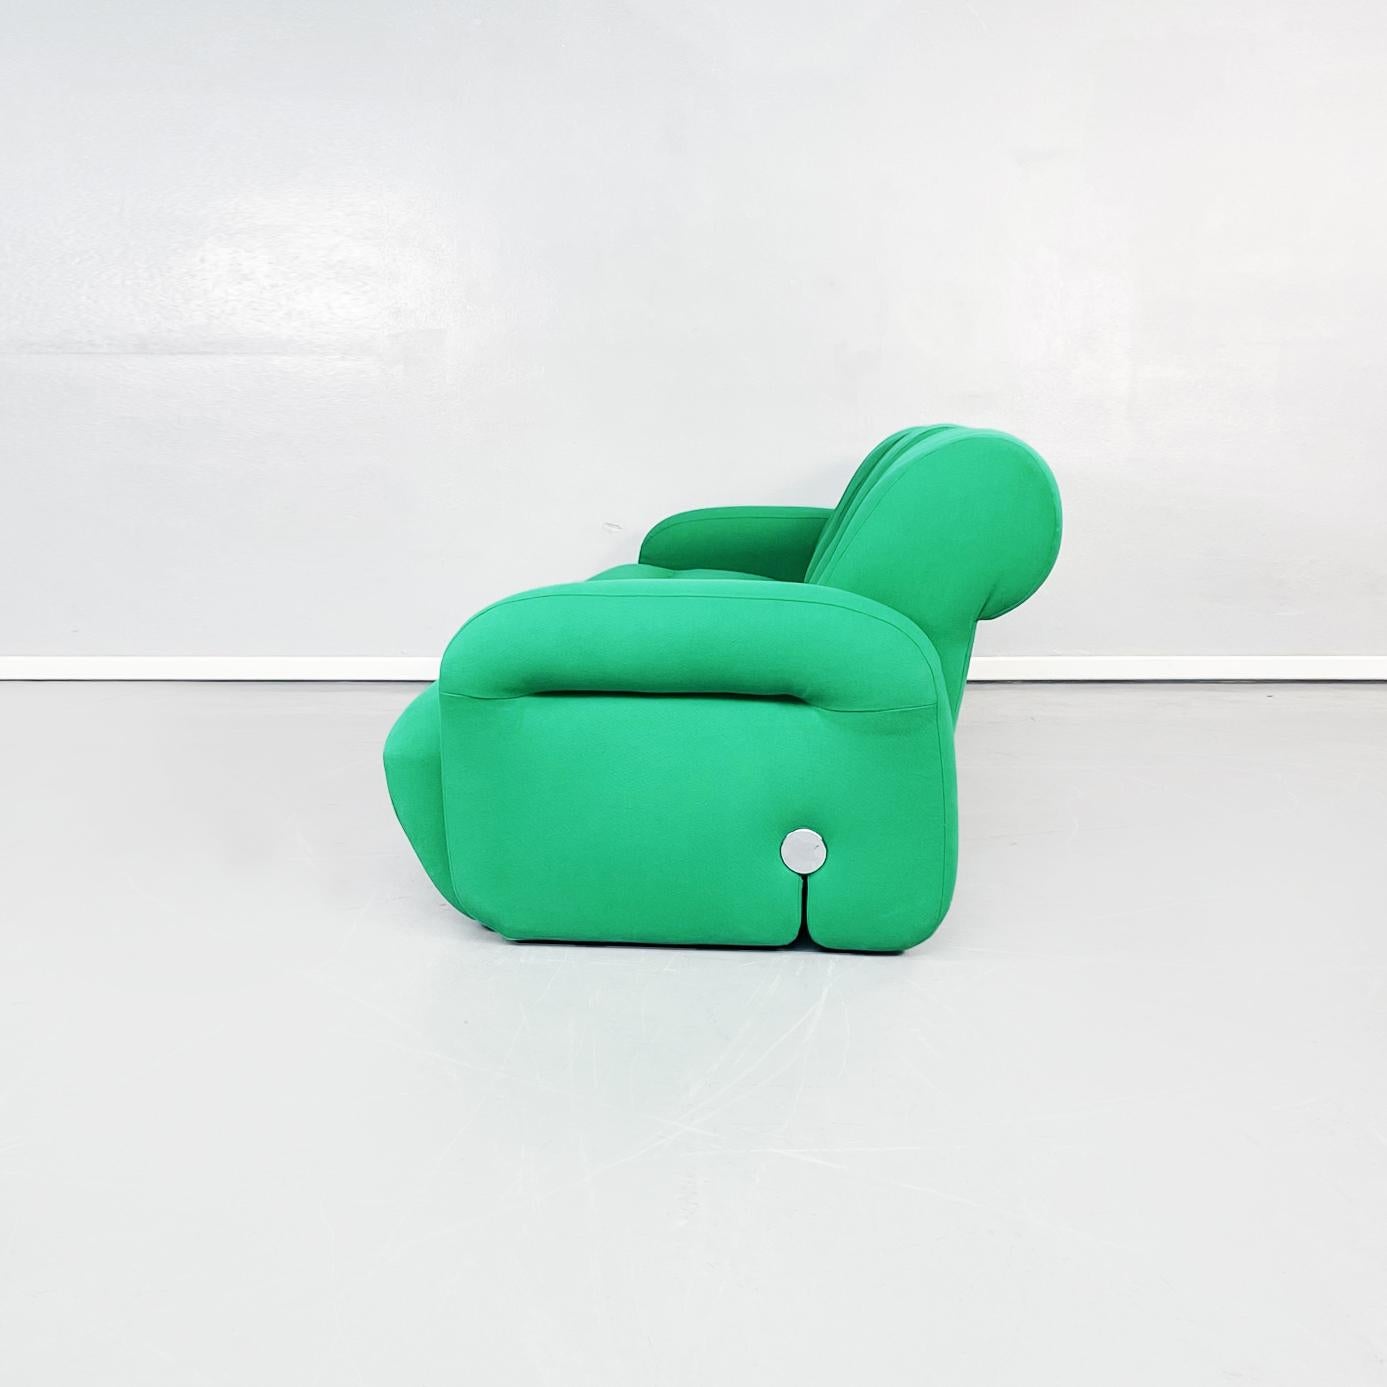 Italian Space Age Modular Sofa in Green Fabric with Metal Insert, 1970s In Good Condition For Sale In MIlano, IT